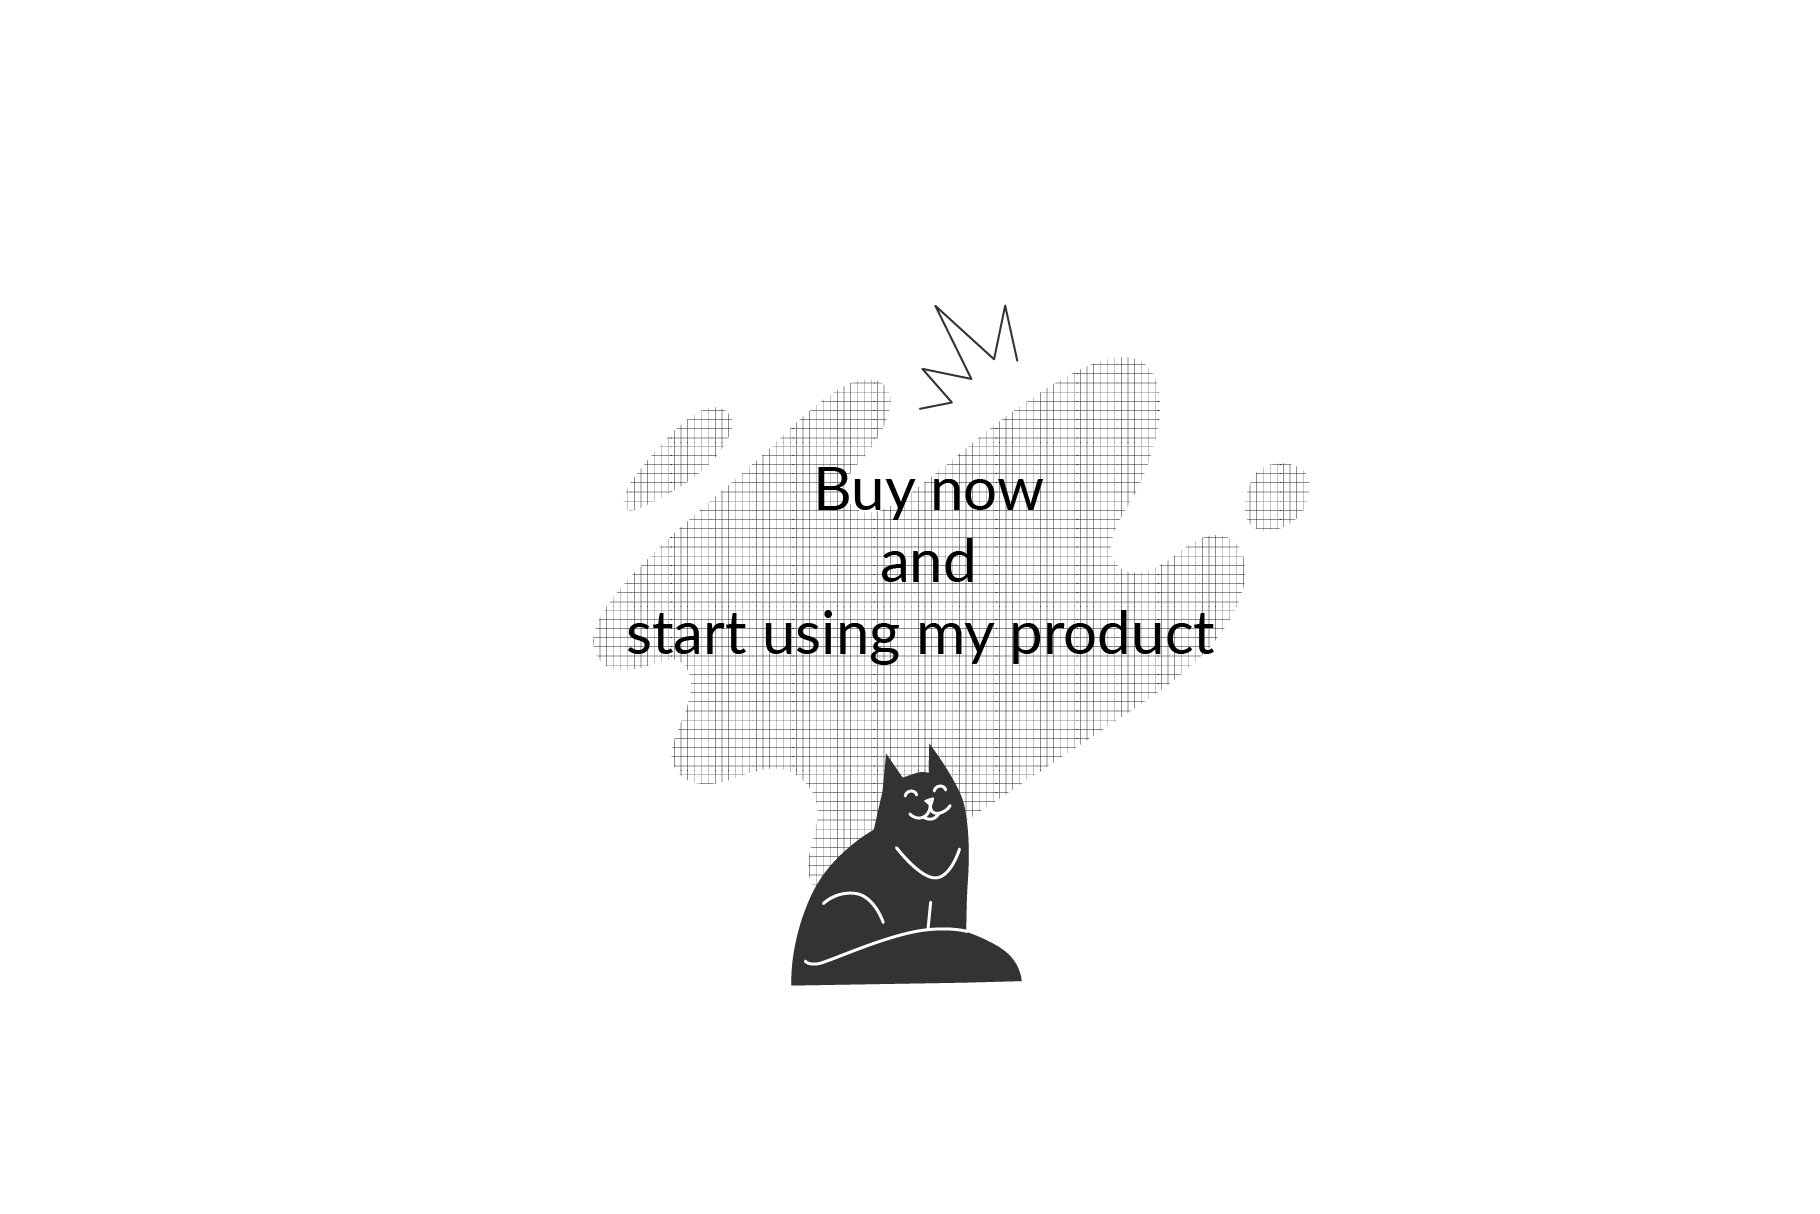 Buy now and start using this product.